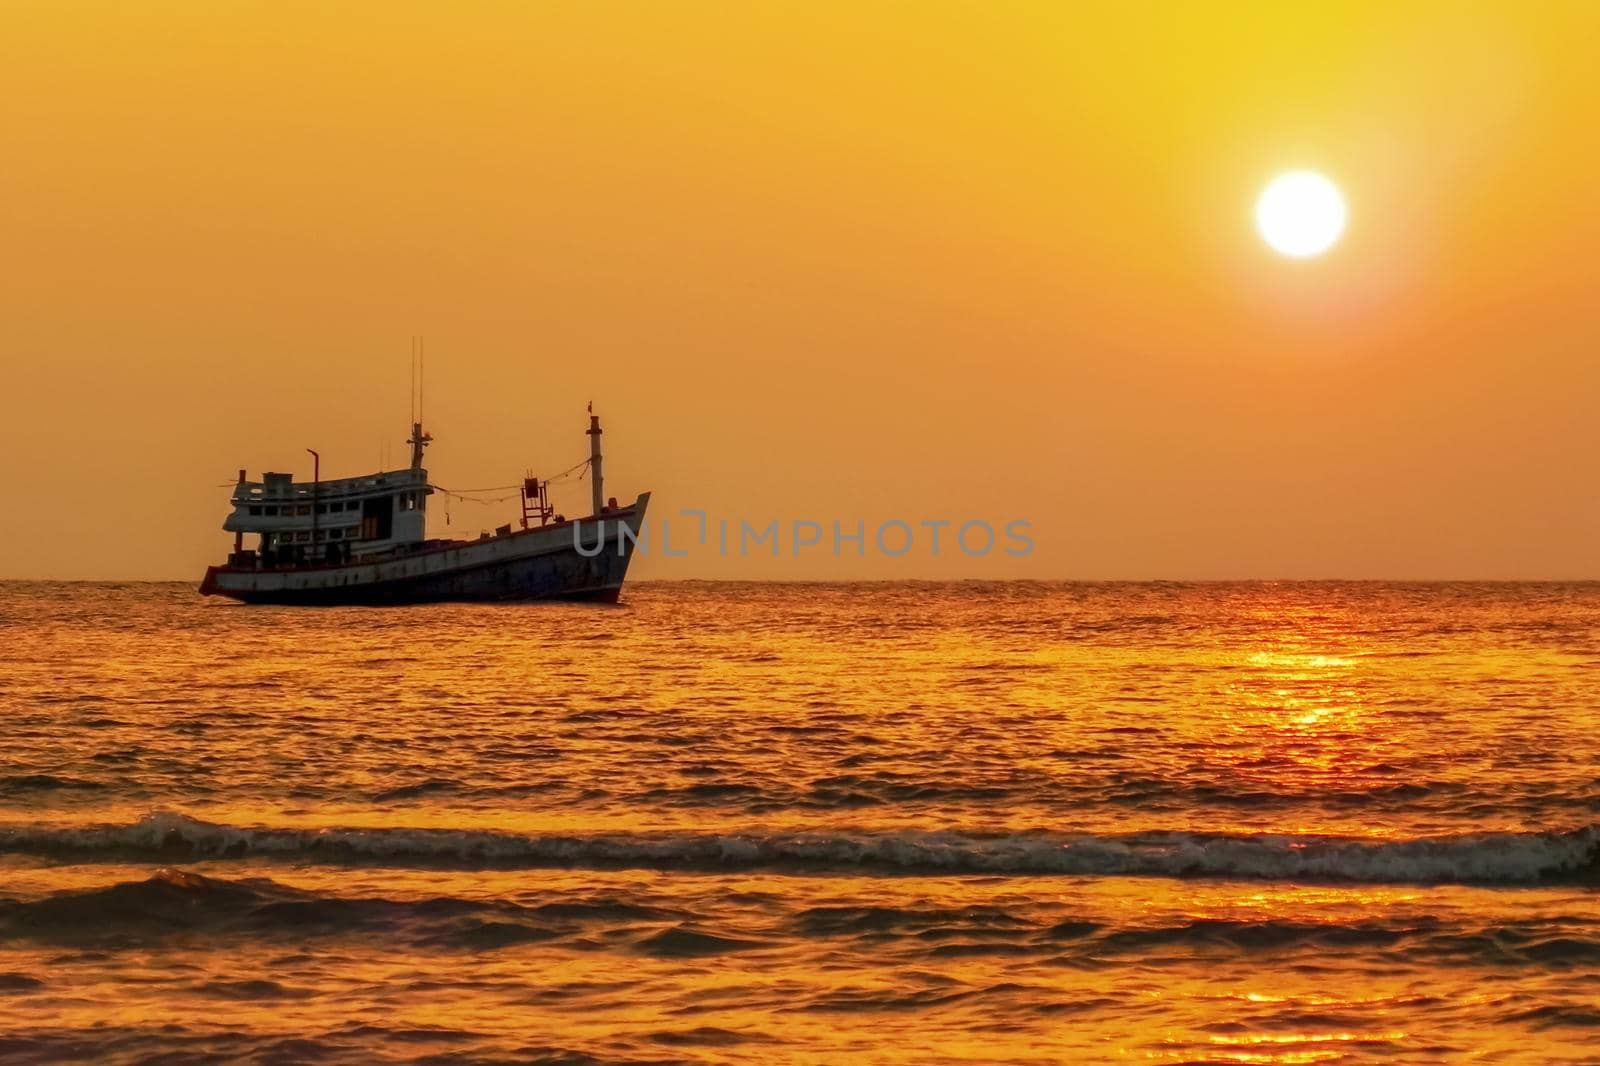 Fishing boat at sea on the horizon during sunset.